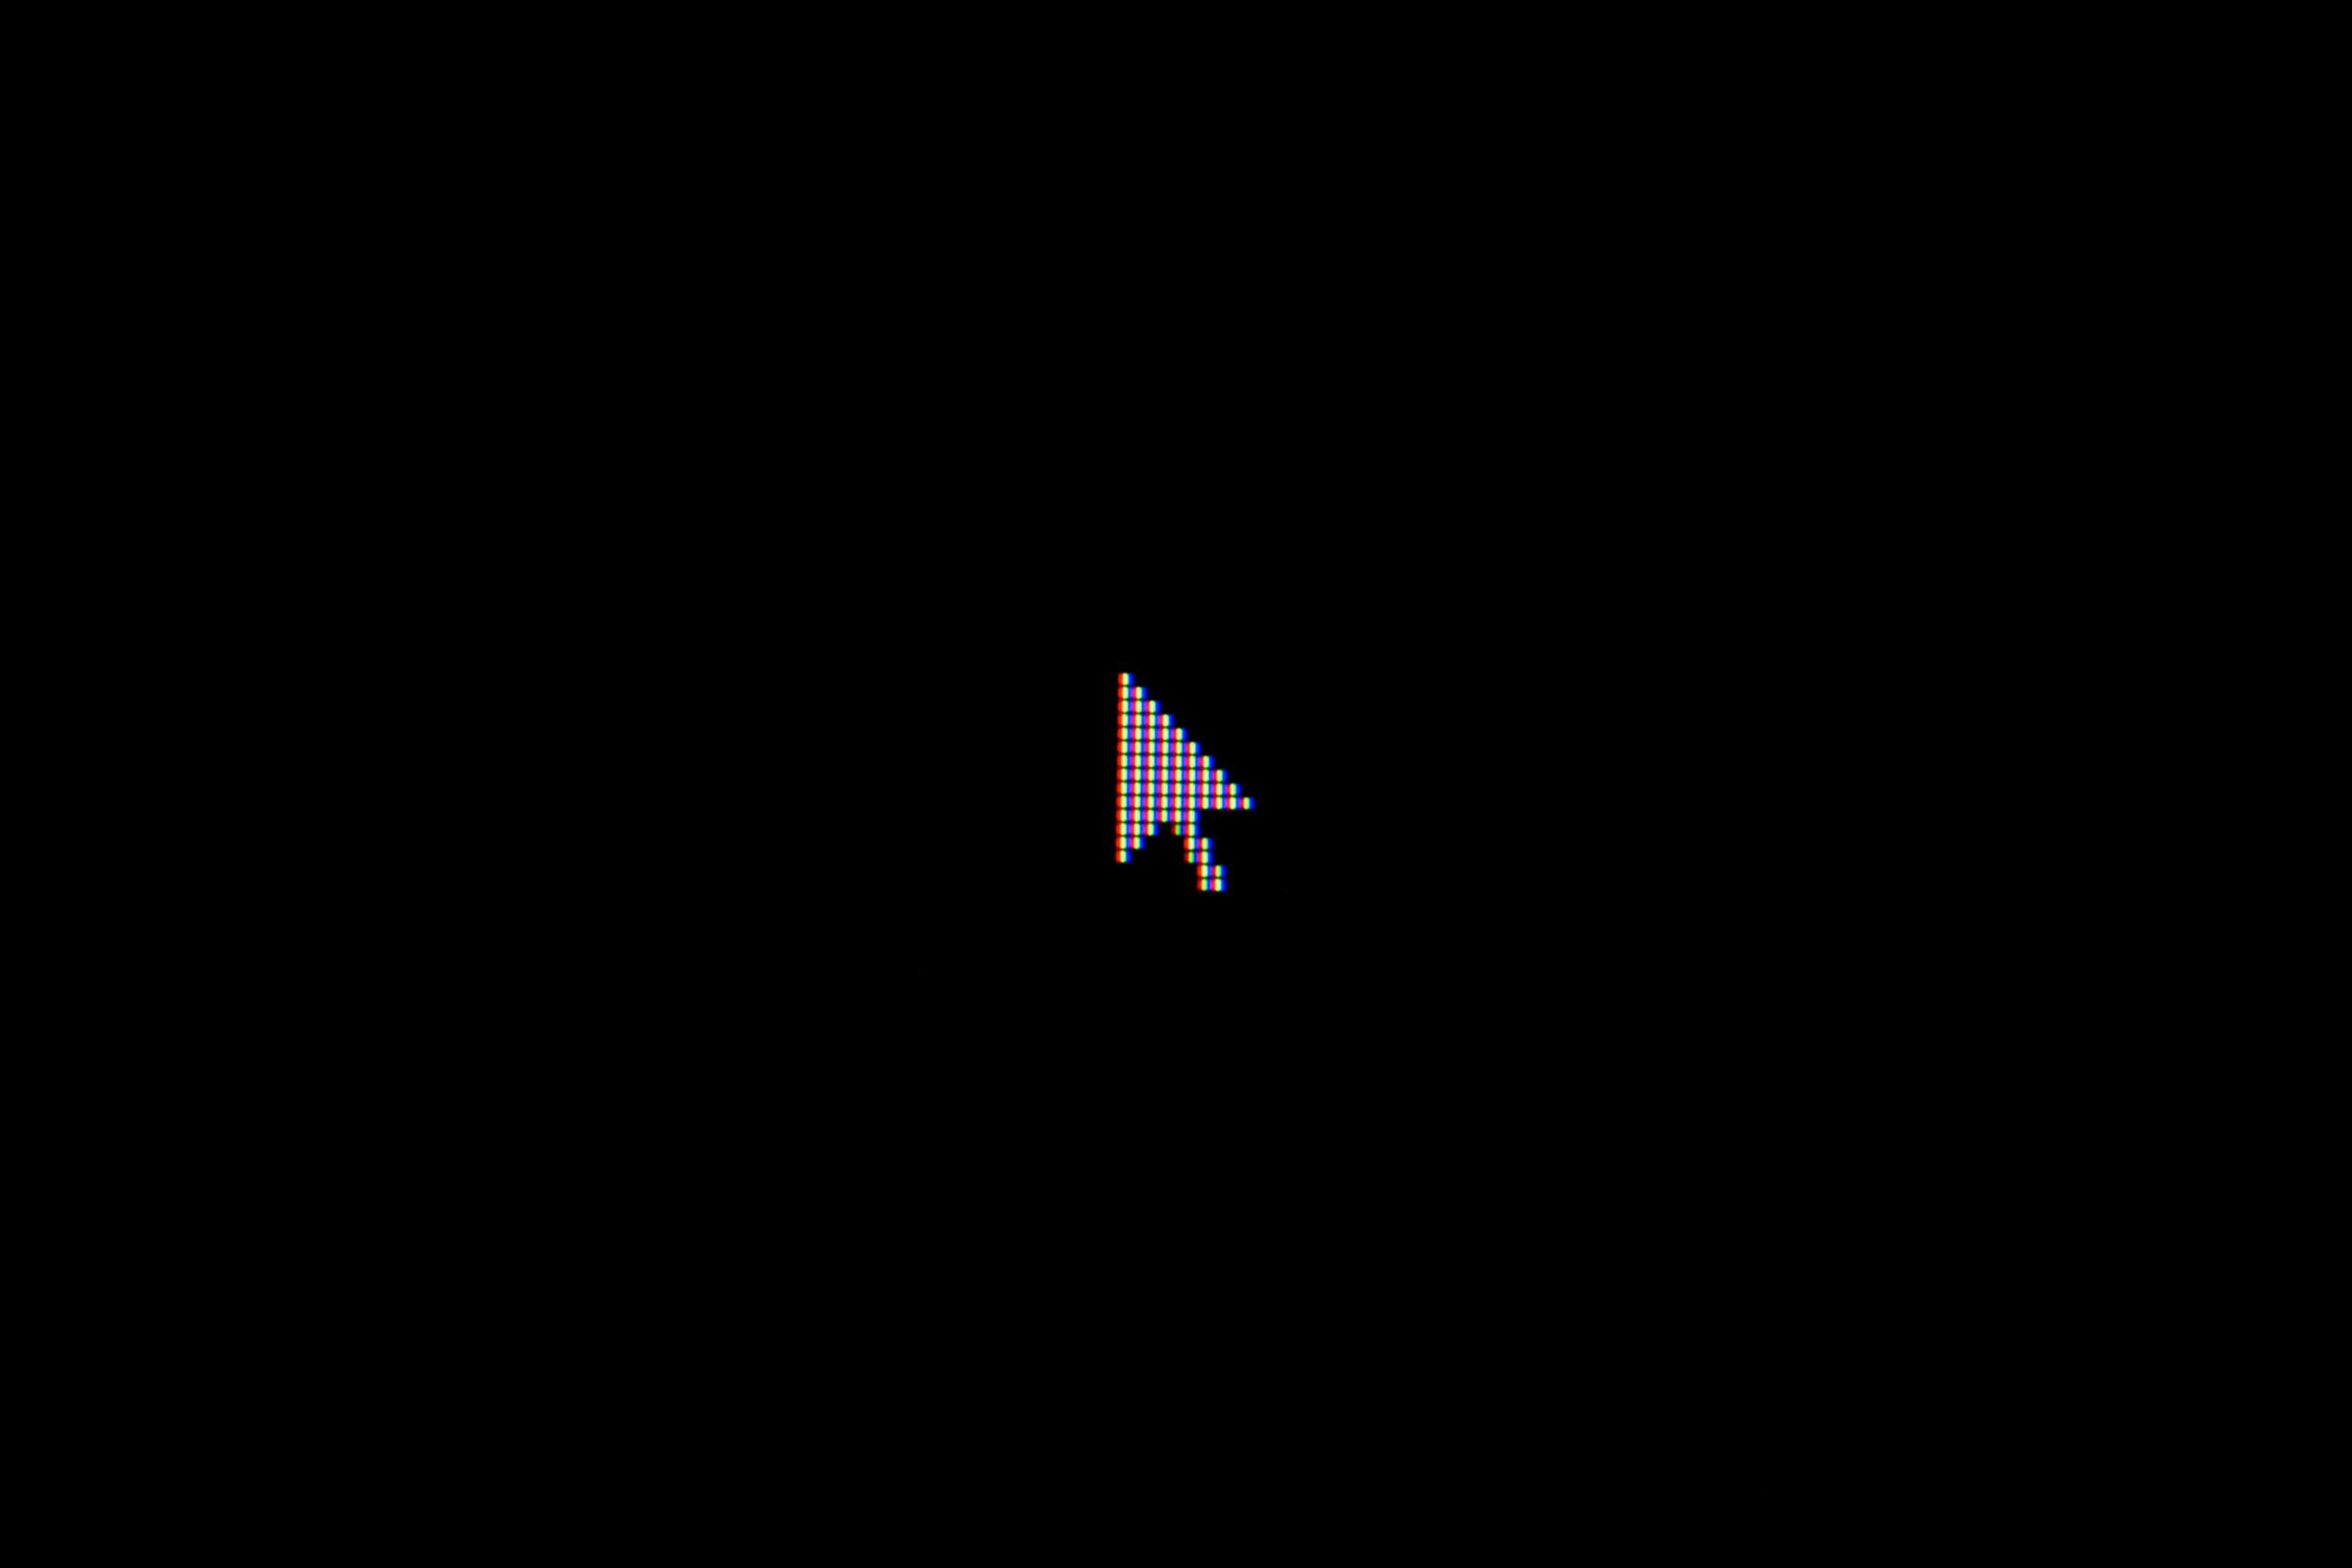 A zoomed in image of a cursor on a blank computer screen.